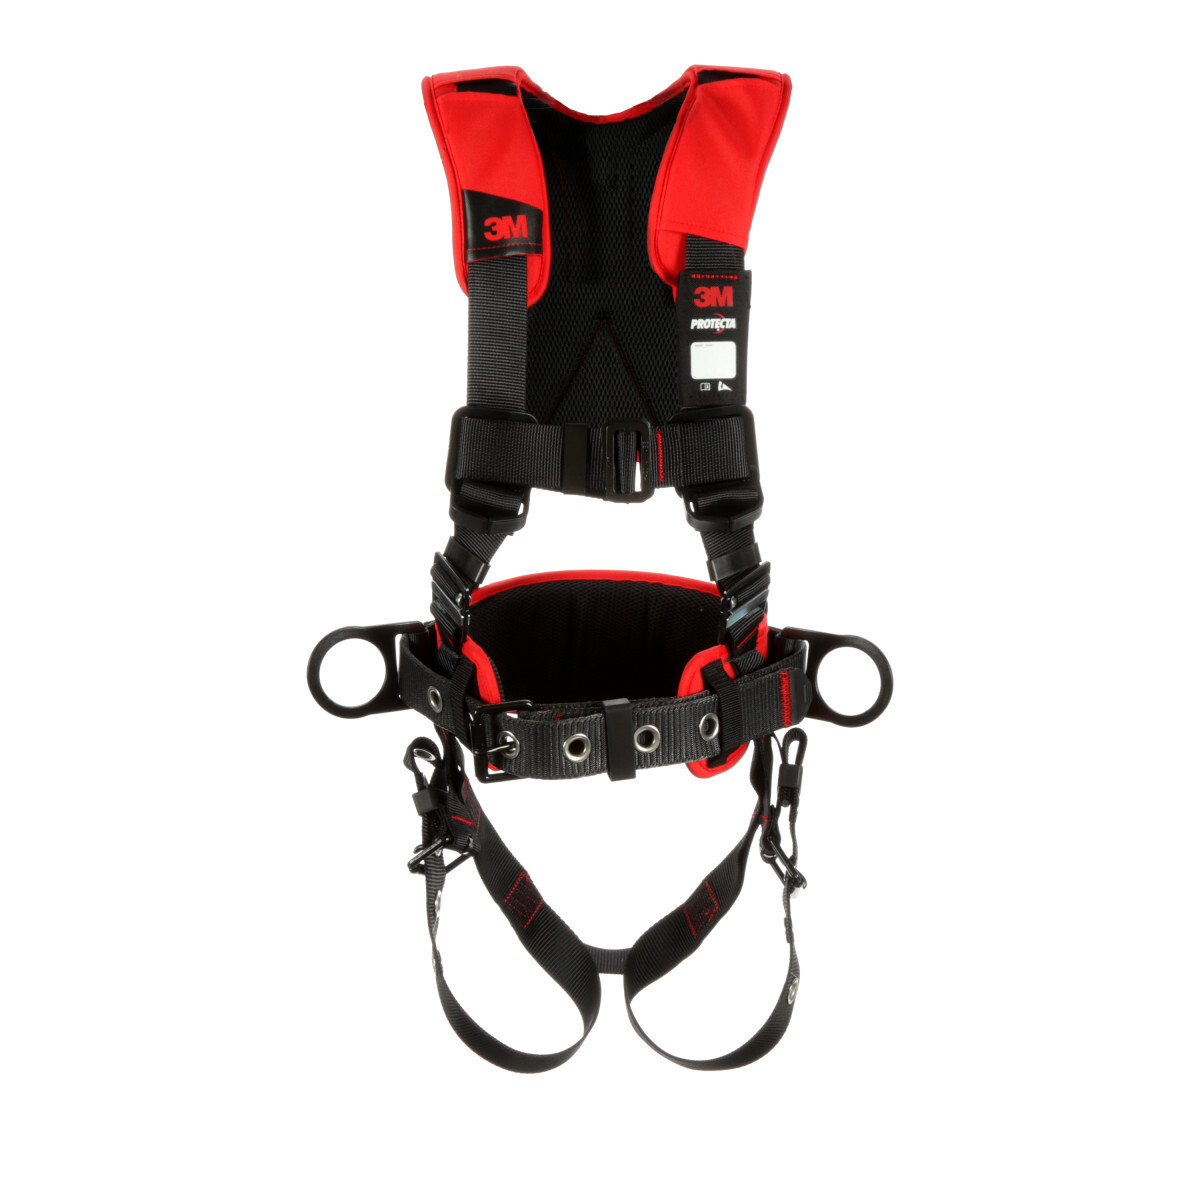 3M™ Protecta® X-Large Comfort Construction Style Full Body Positioning Harness With Easy-Link Web Adapter, Auto-Resetting Lanyar